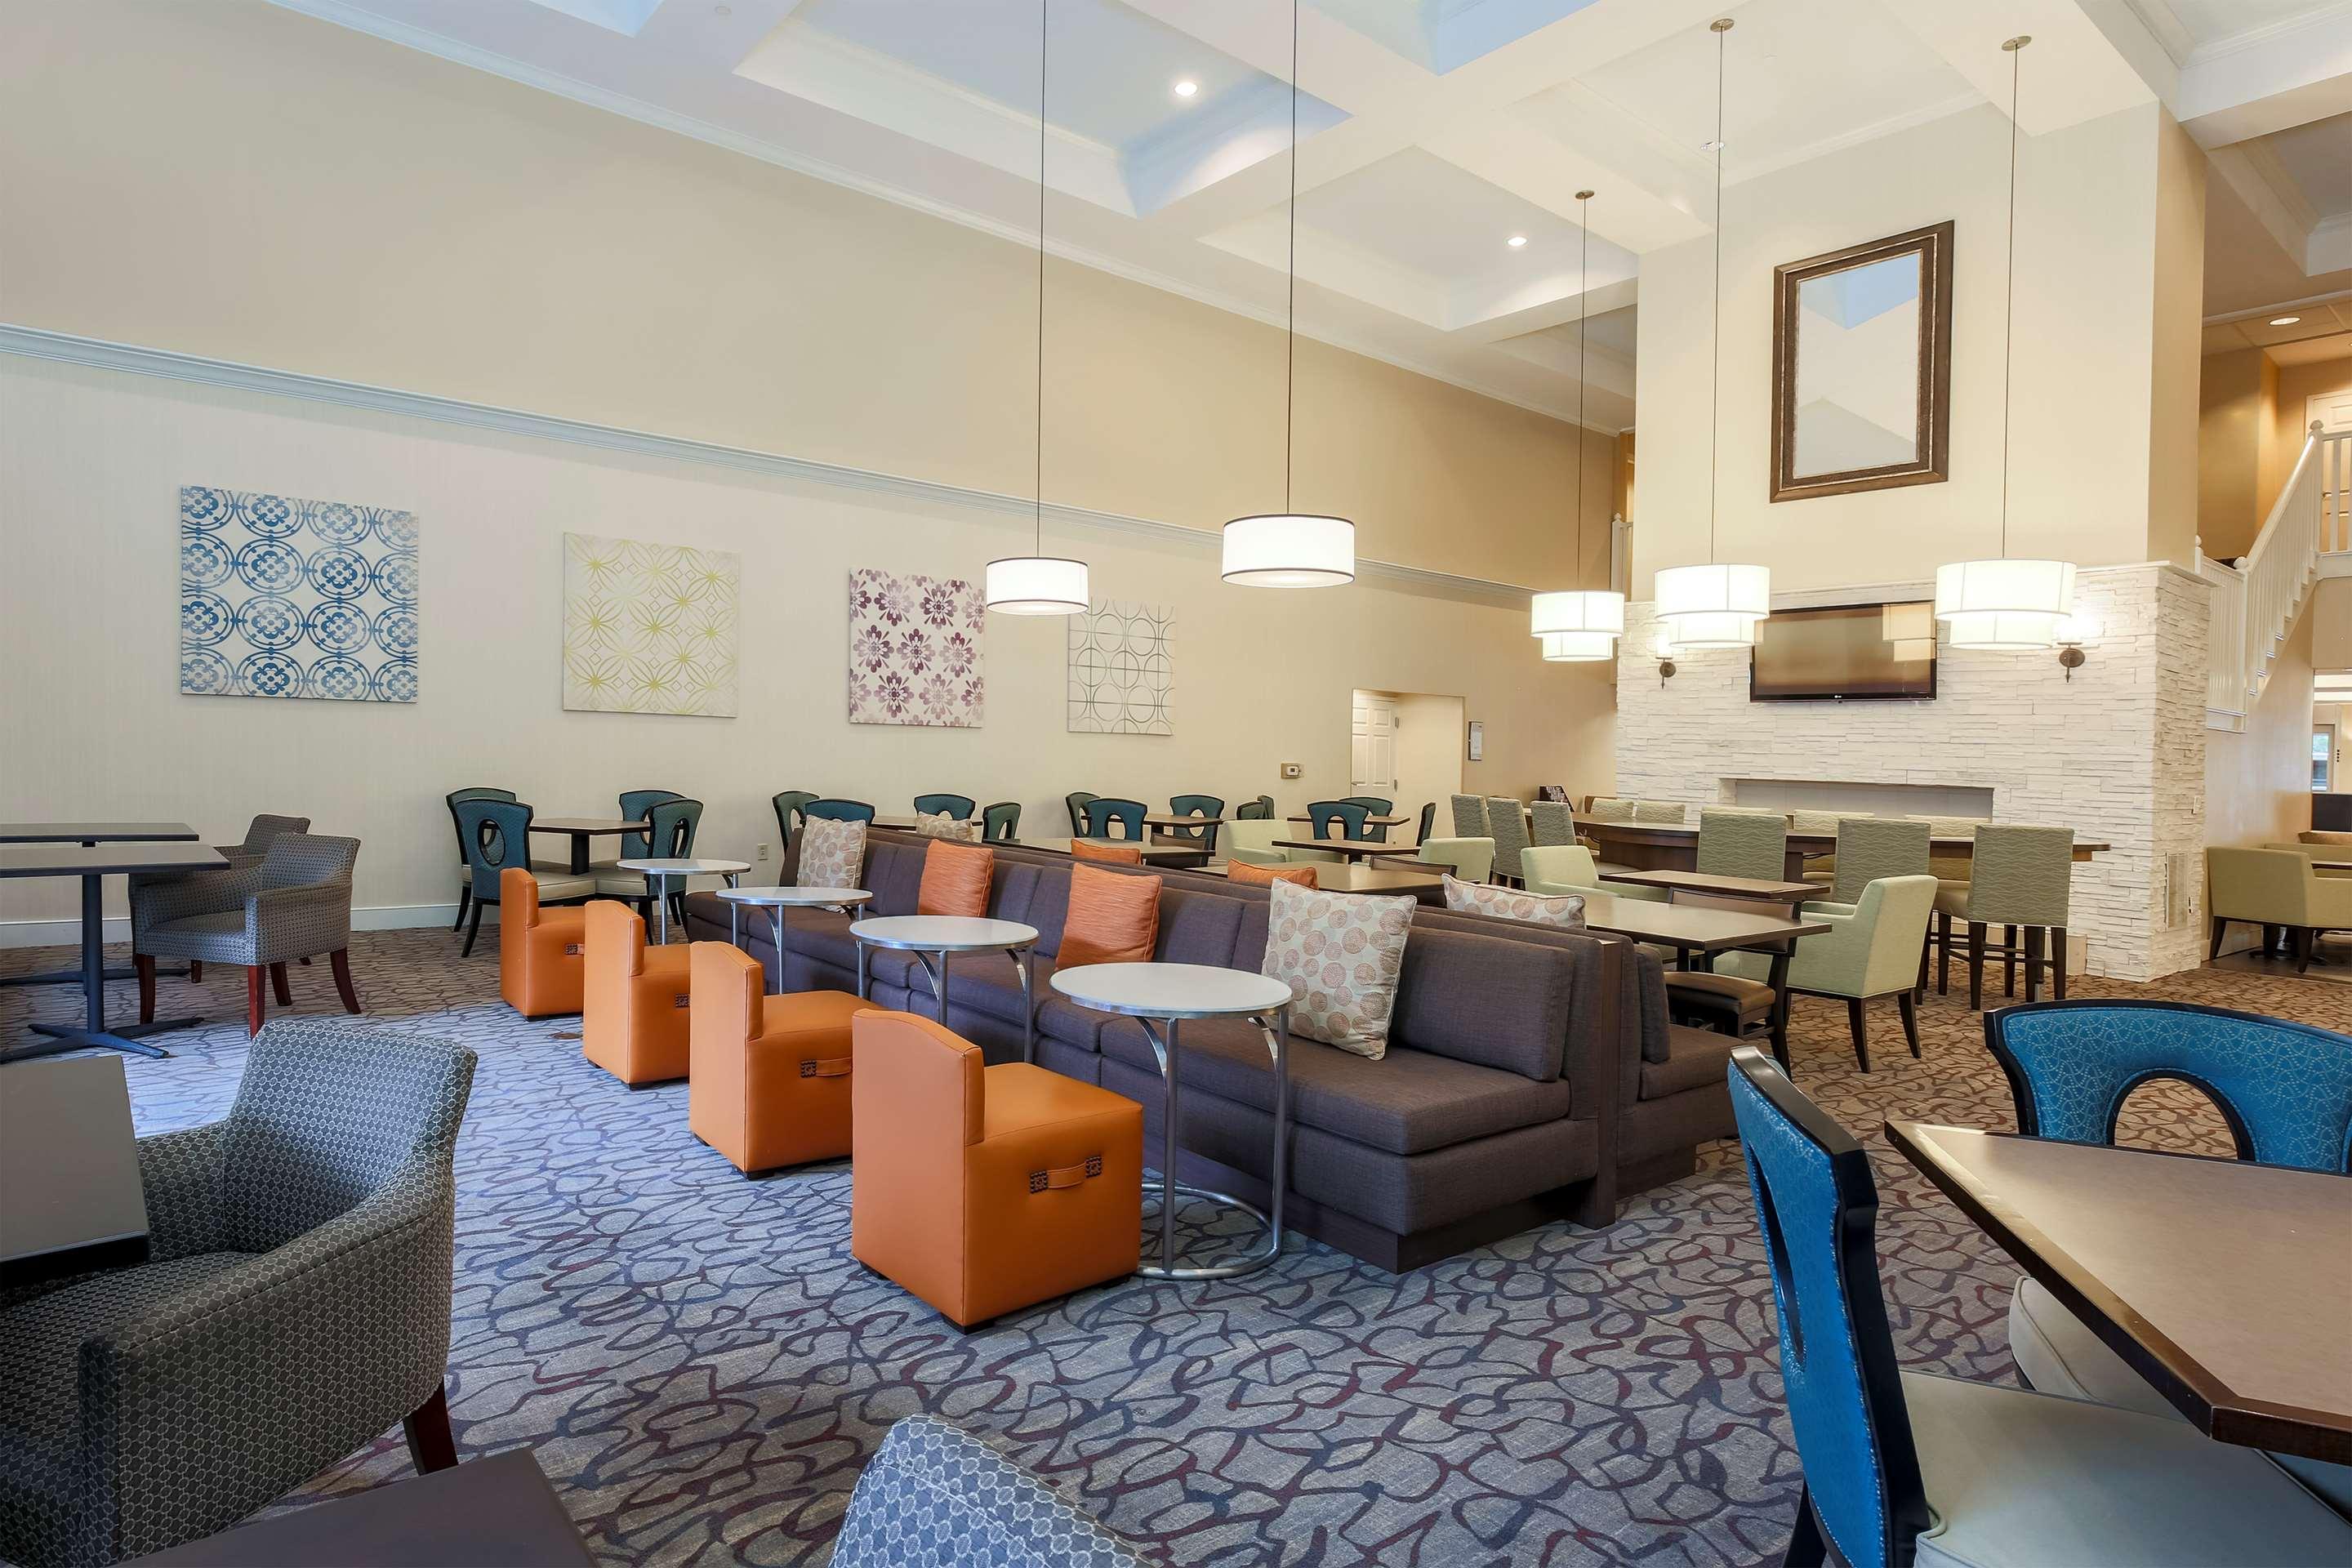 Homewood Suites By Hilton Louisville Airport, Louisville: Reviews & Hotel  Deals | Book at Hotels.com